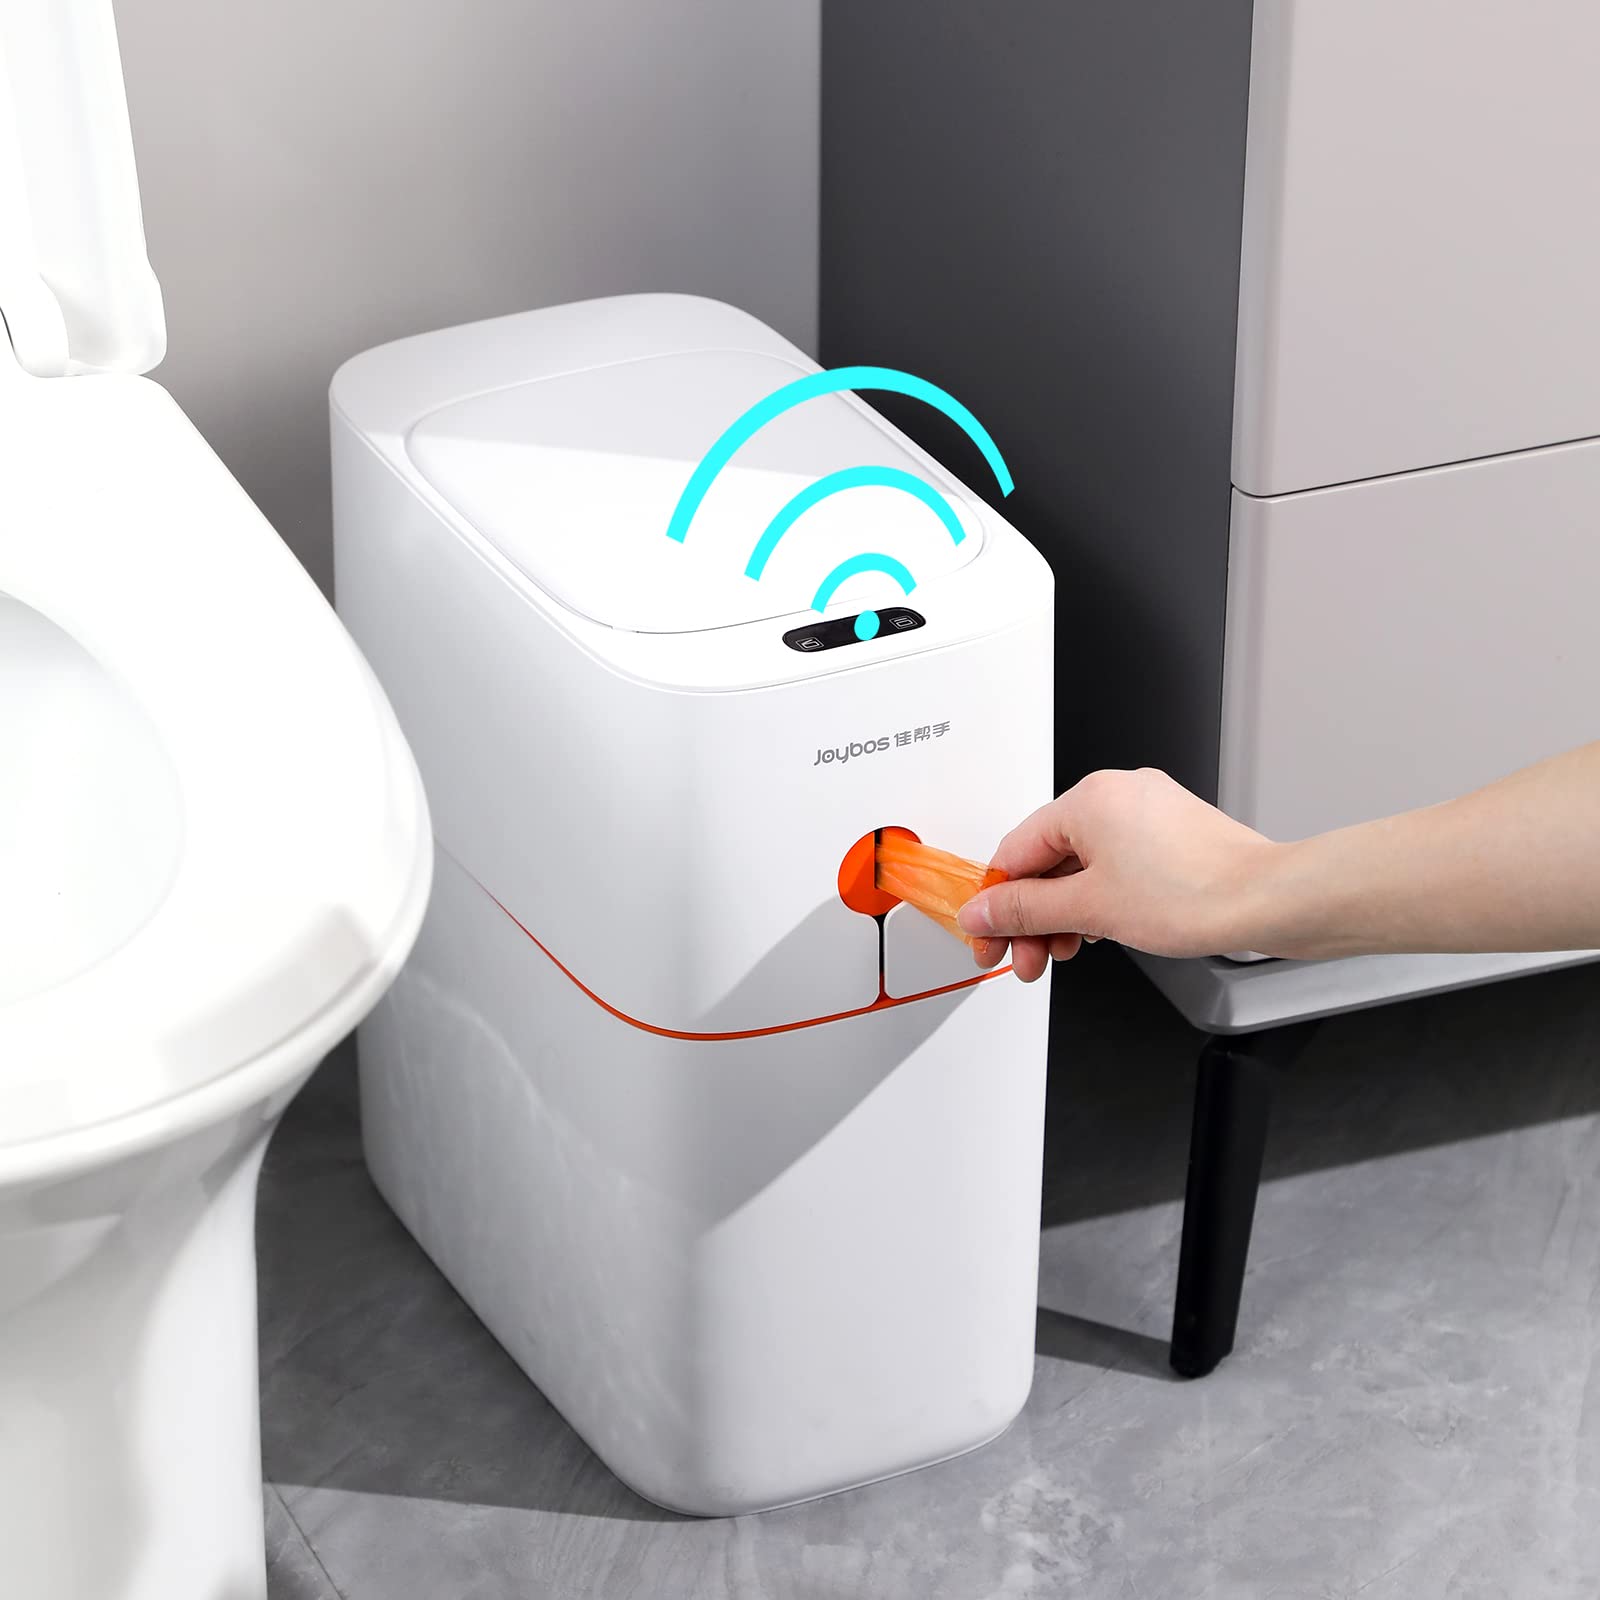 JOYBOS Smart Induction Trash Can IPX5 Waterproof Automatic Motion Sensor Trash can for Bathroom Bedroom Home Office Odorless | Electrr Inc